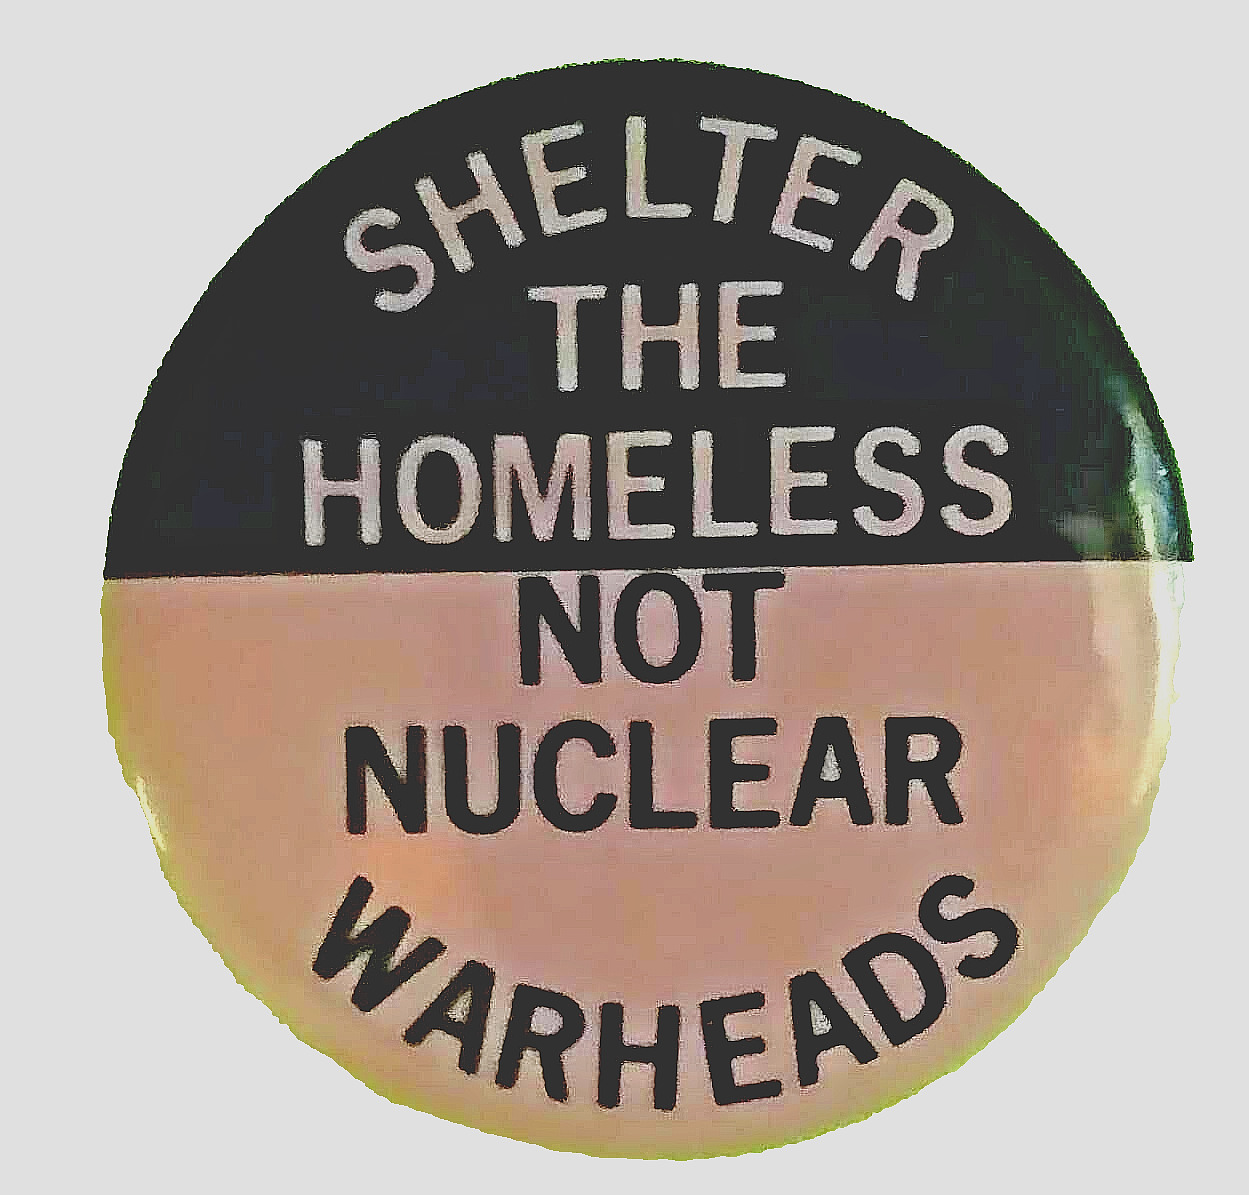 SHELTER THE HOMELESS Not Nuclear Warheads - 1983 Nuclear Disarmament Protest Pin